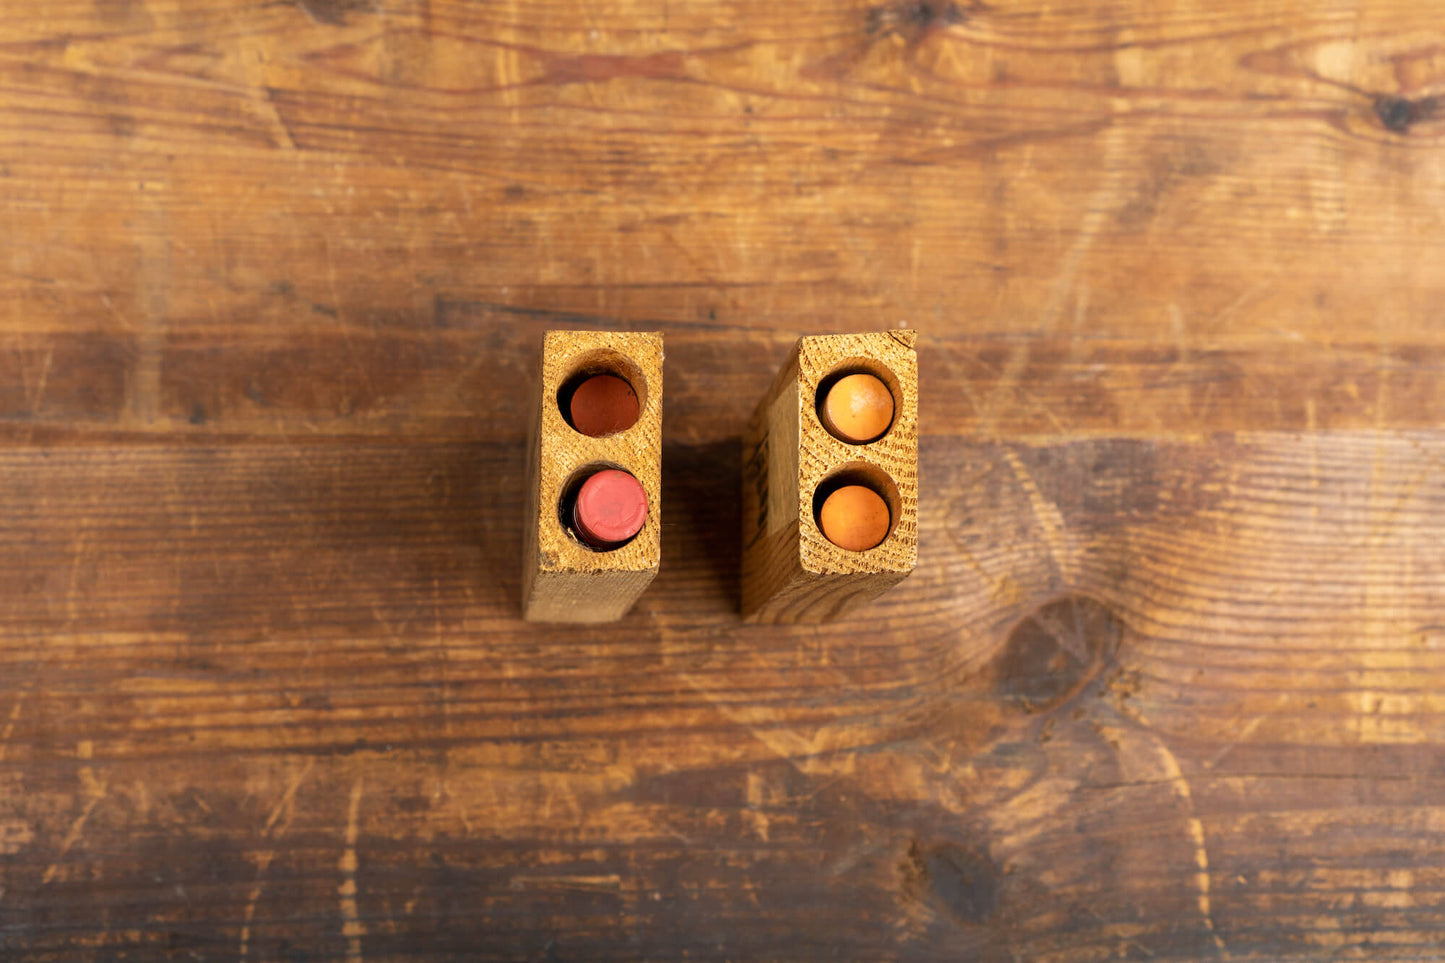 A flatlay photo taken from above of two vintage test tubes in wooden holders.